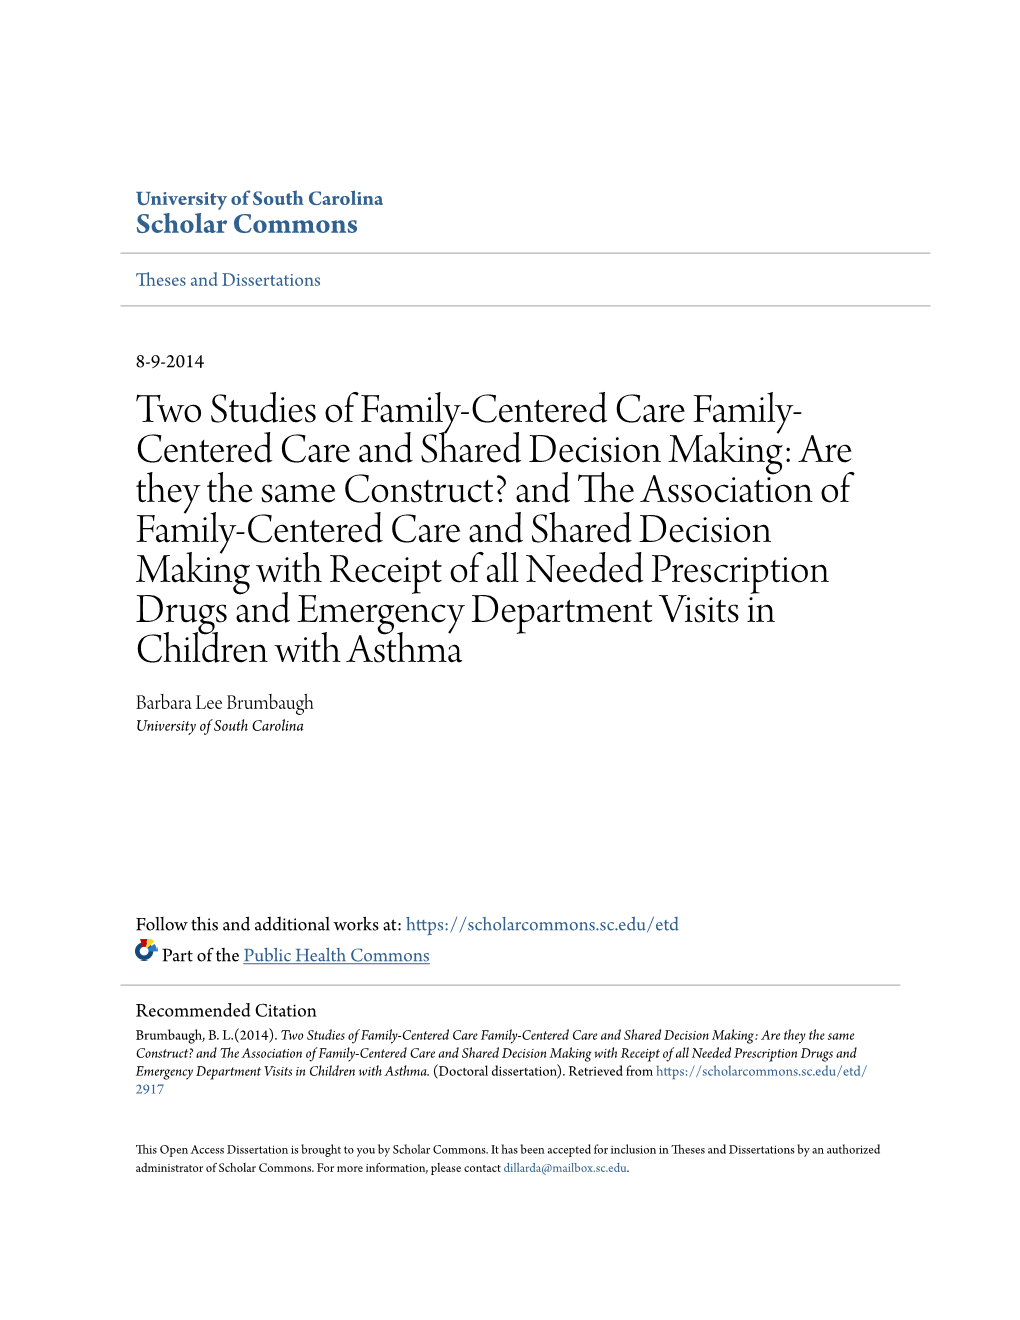 Two Studies of Family-Centered Care Family-Centered Care and Shared Decision Making: Are They the Same Construct? and the Associ